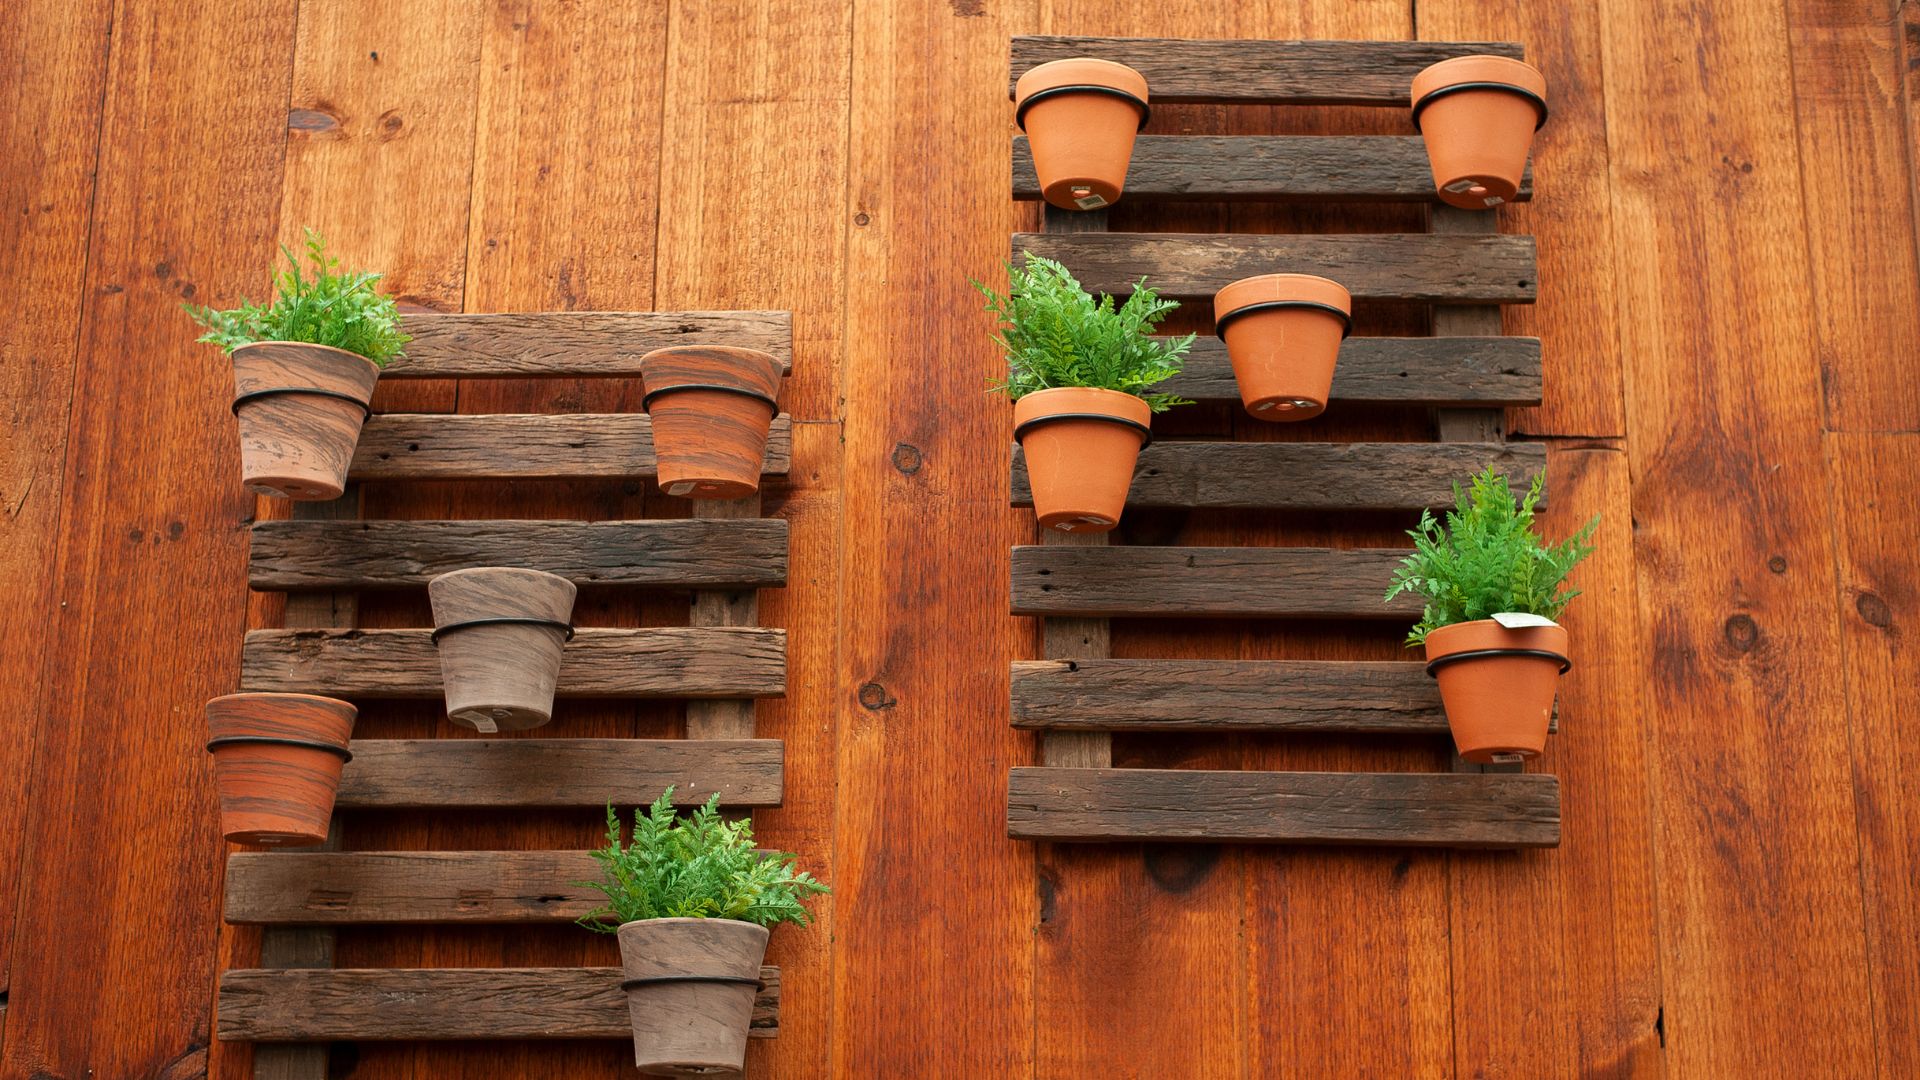 Terracotta Indoor Planters Are The Absolute Best Thing For Your Houseplants And This Is Why